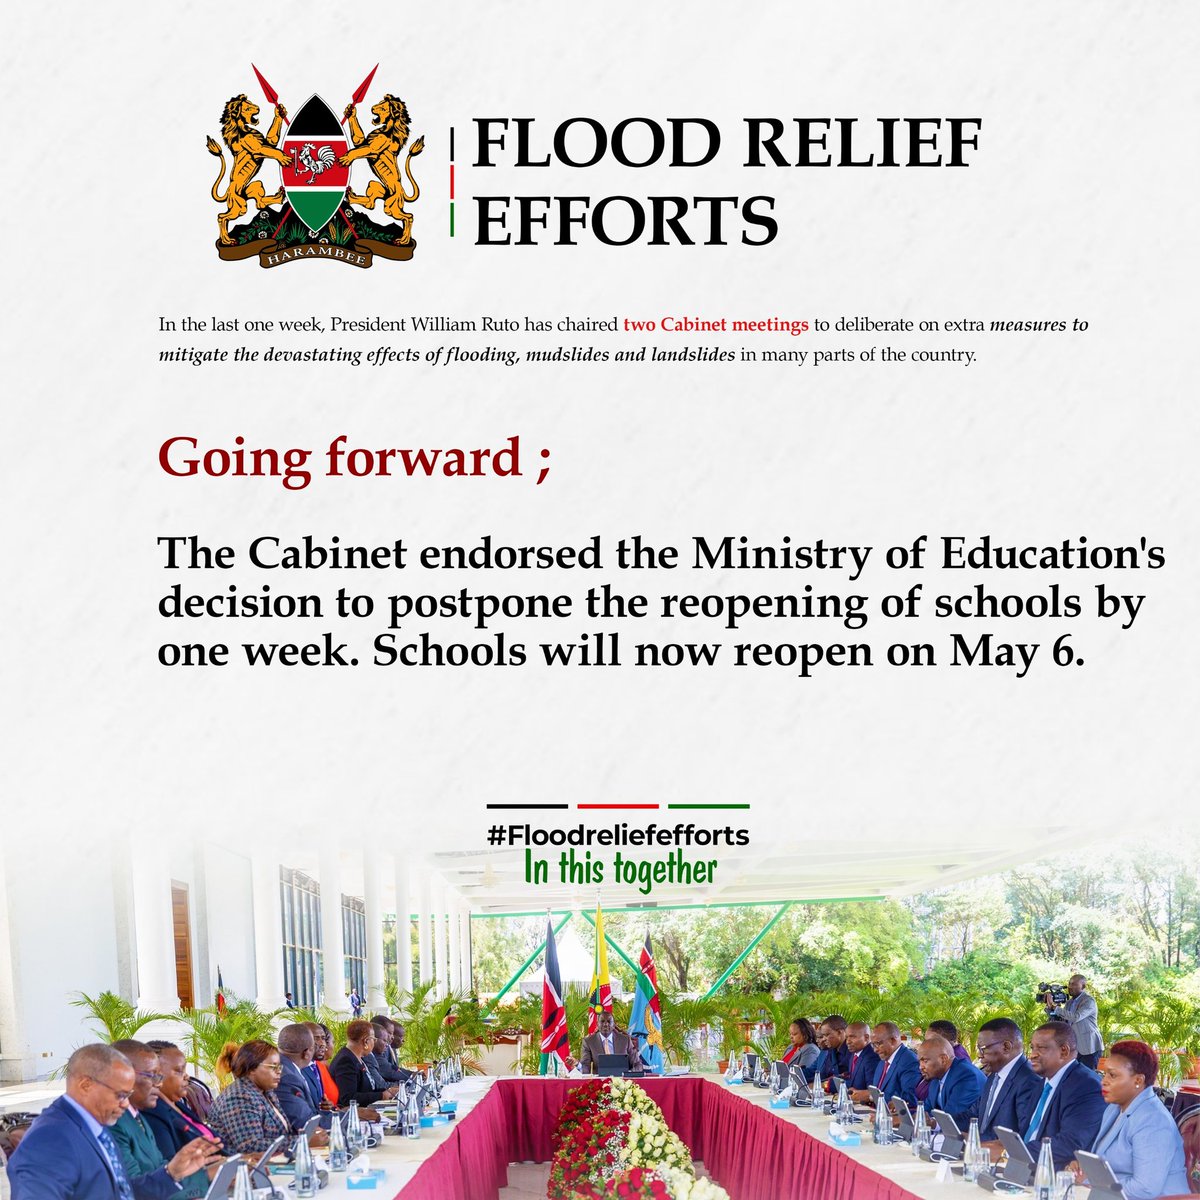 GOK is establishing emergency shelters and evacuation routes for residents in flood-prone regions. #FloodReliefEfforts In It Together